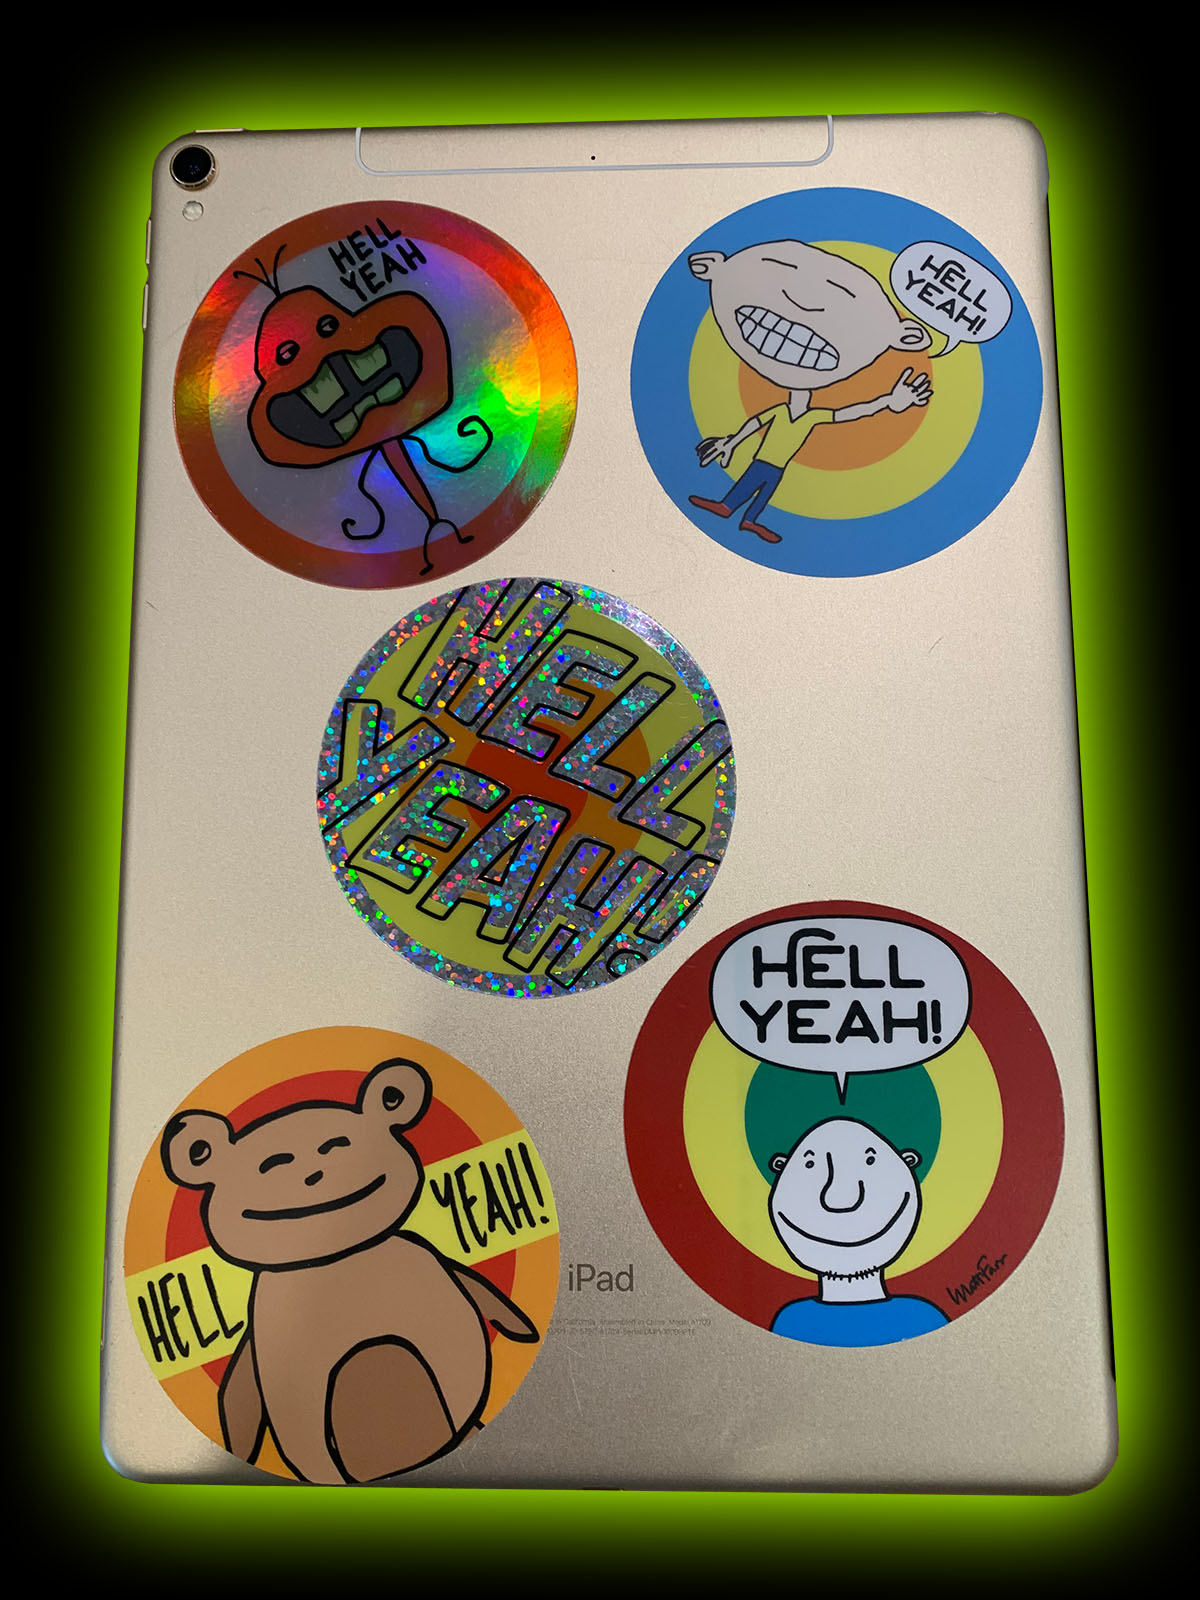 Fun fact: your iPad will run 79% cooler with Hell Yeah stickers.